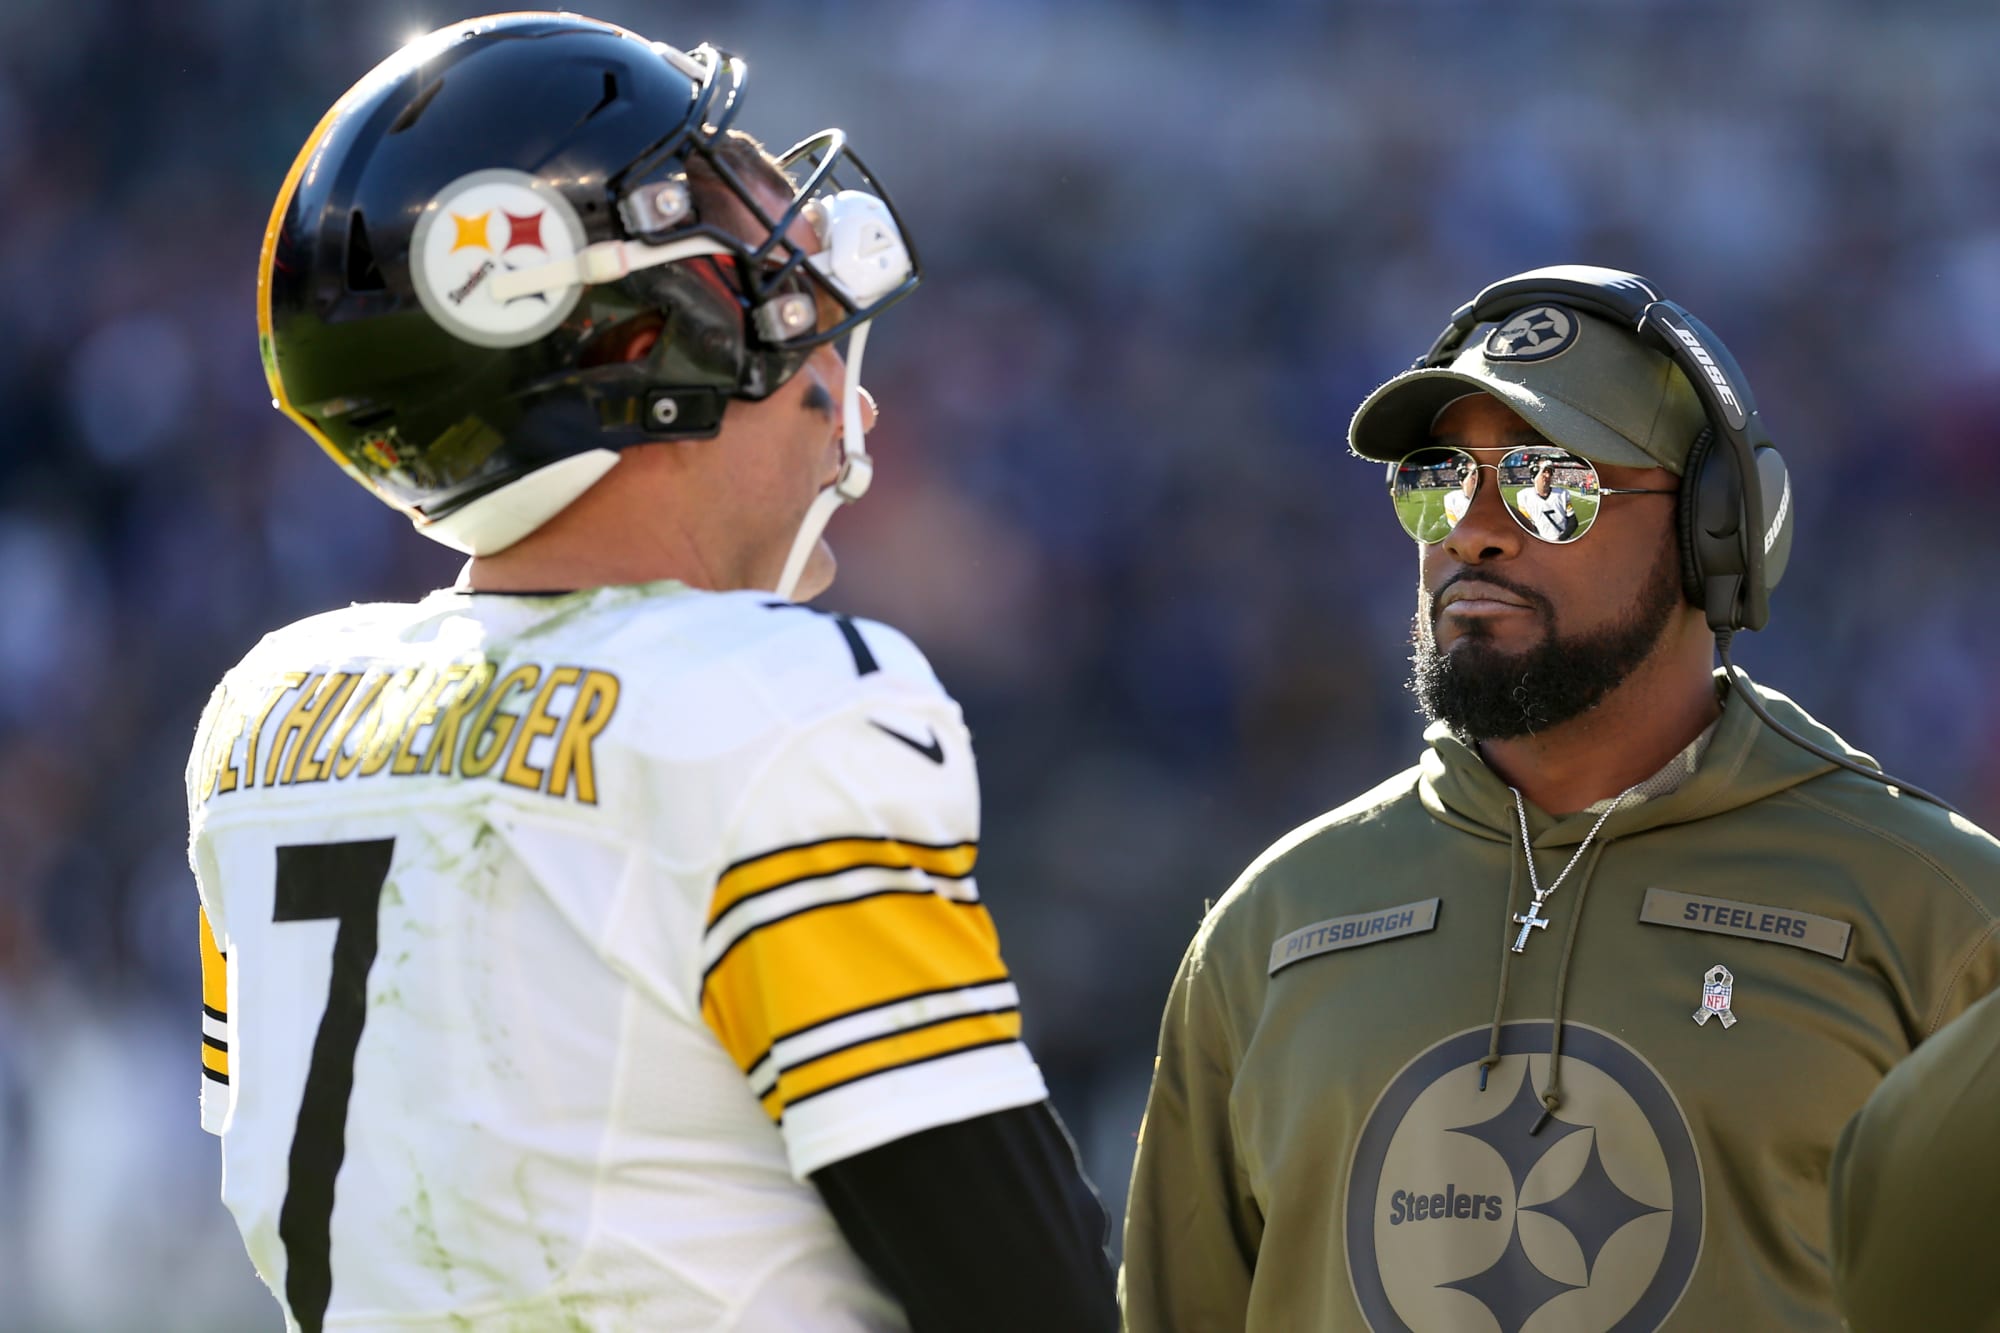 Steelers difficult schedule could lead to poor record in 2019